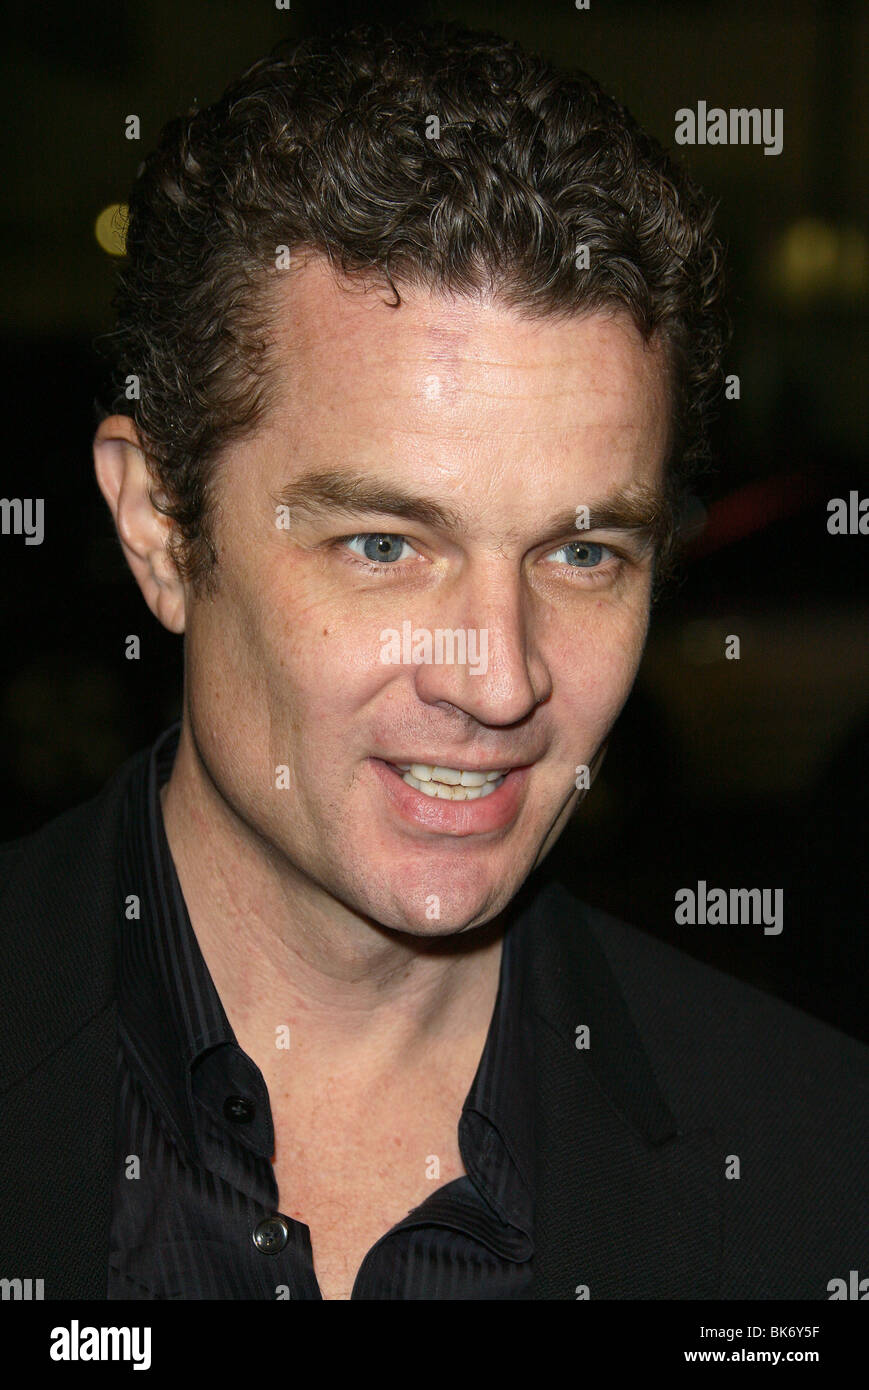 JAMES MARSTERS P.S. I LOVE YOU FILM PREMIERE GRAUMANS CHINESE HOLLYWOOD LOS ANGELES USA 09 décembre 2007 Banque D'Images